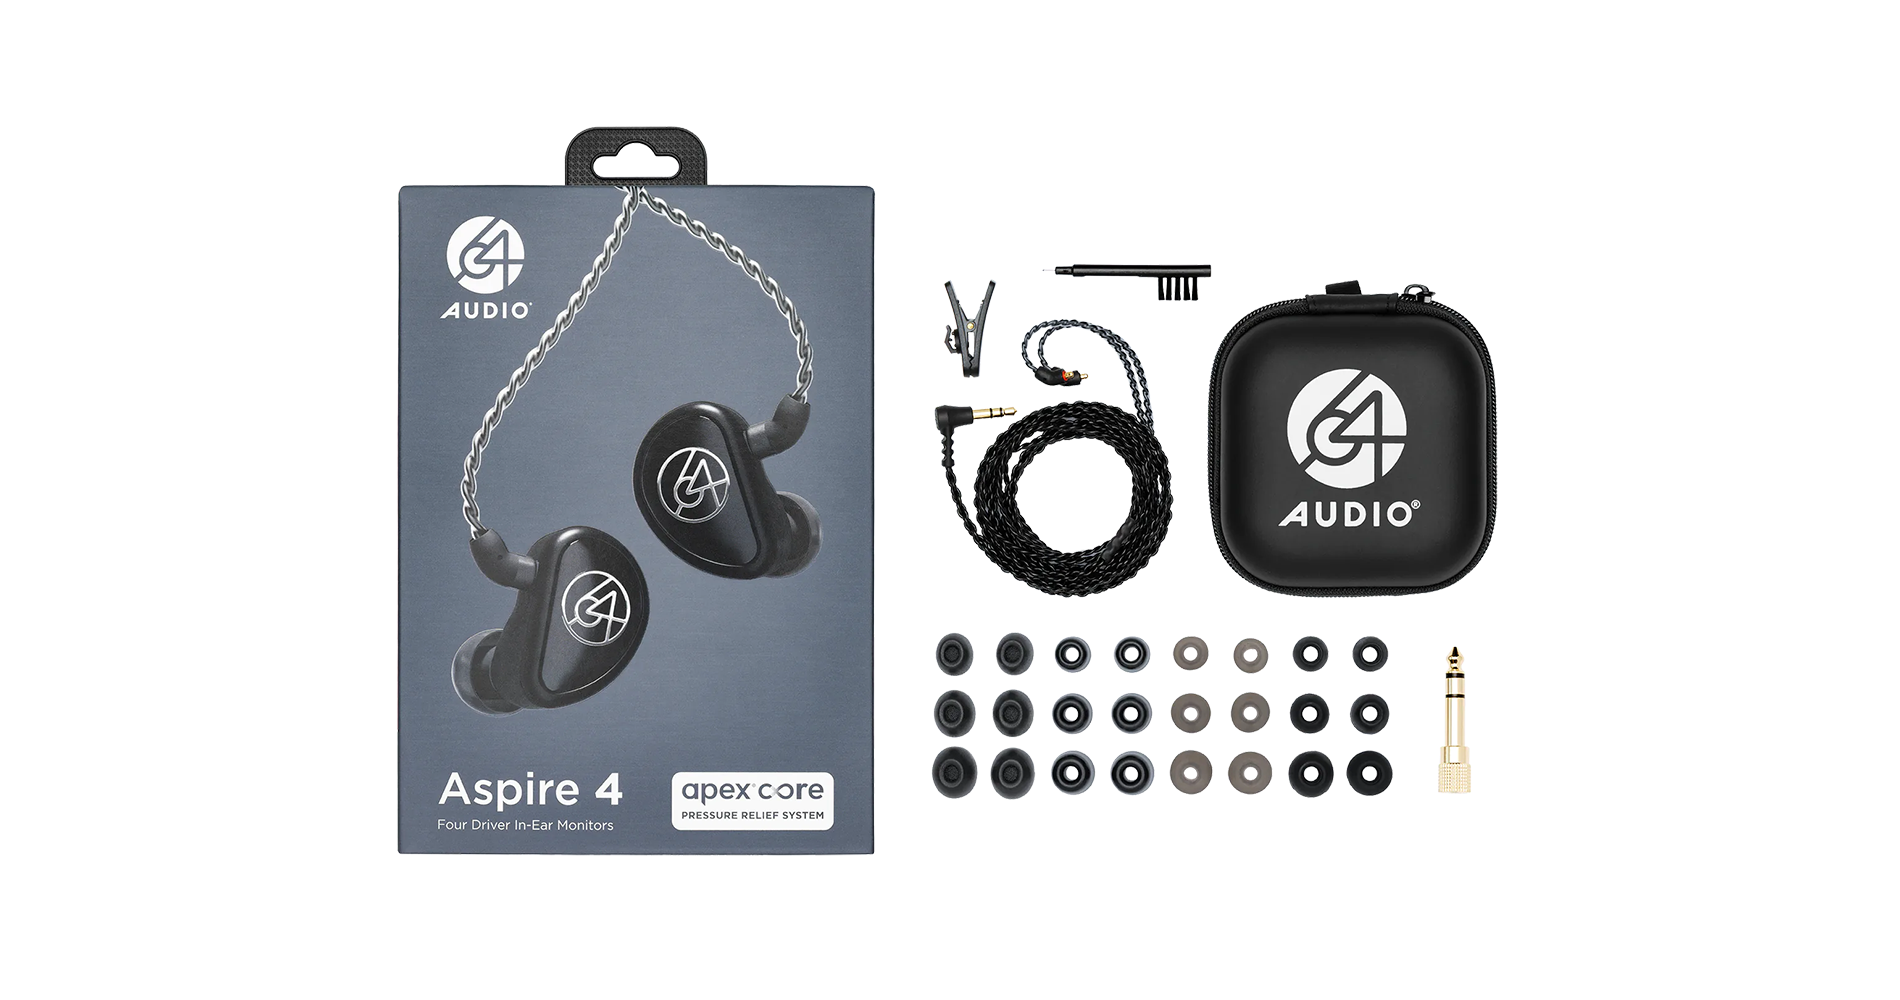 64 Audio Aspire 4 Universal In-Ear Monitor In The Box